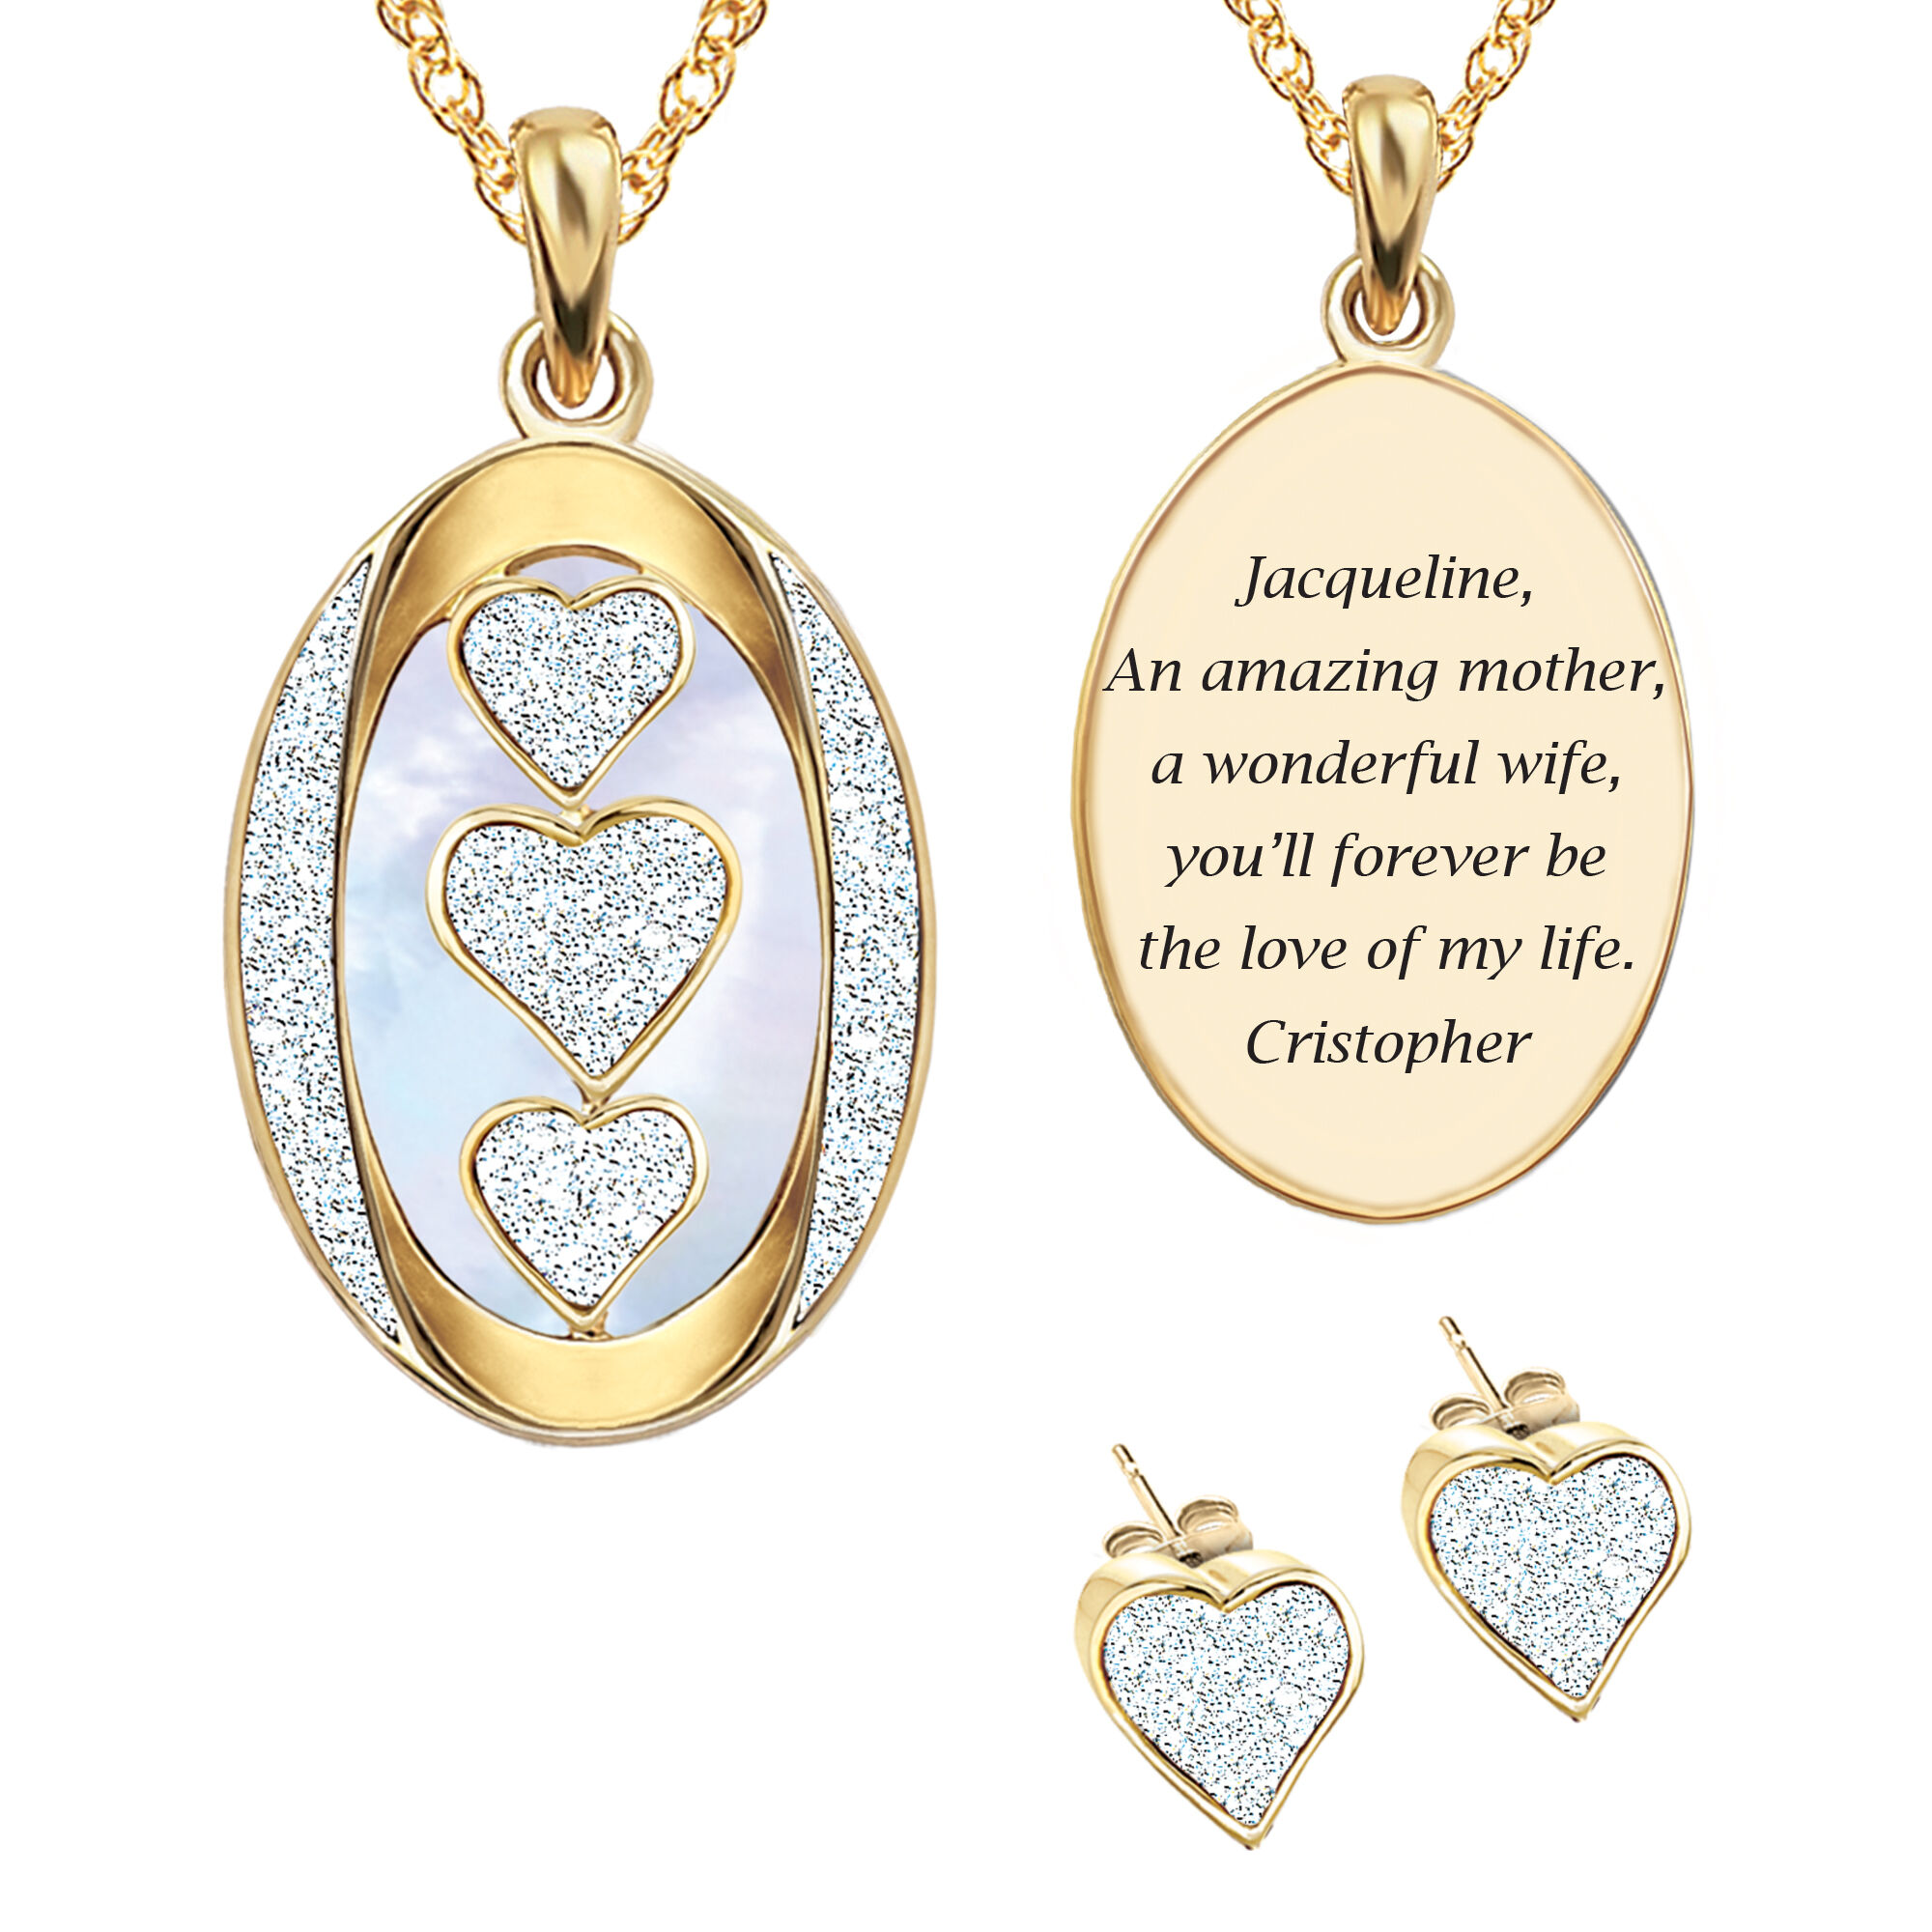 I Love You Personalized Diamond Pendant with FREE Matching Earrings 5238 0268 a main